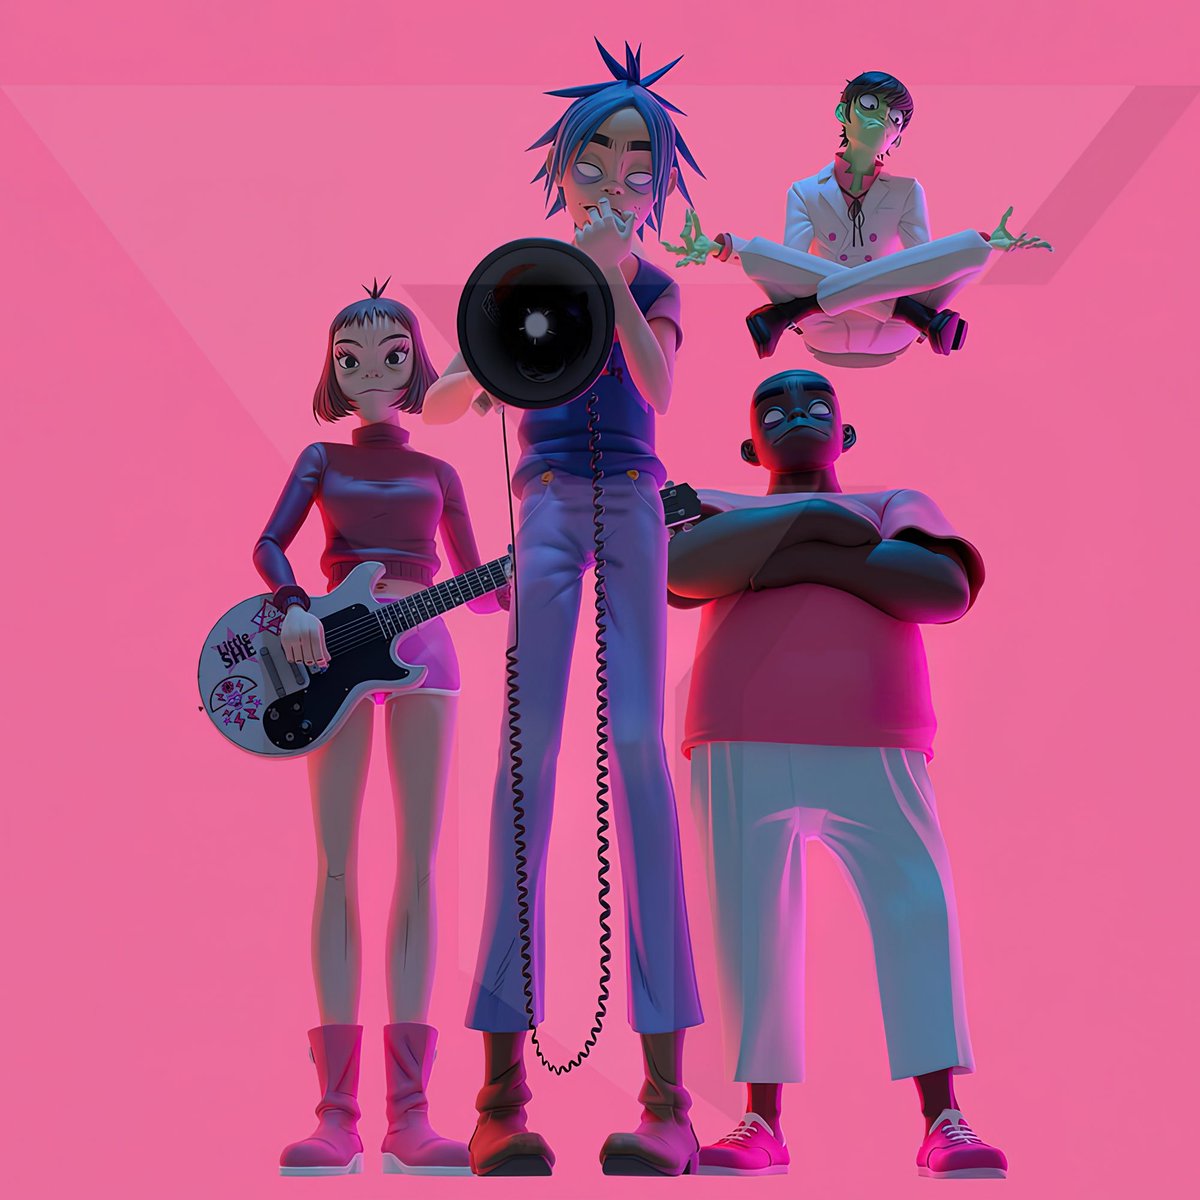 Gorillaz: Cracker Island review — shallow music about a shallow age